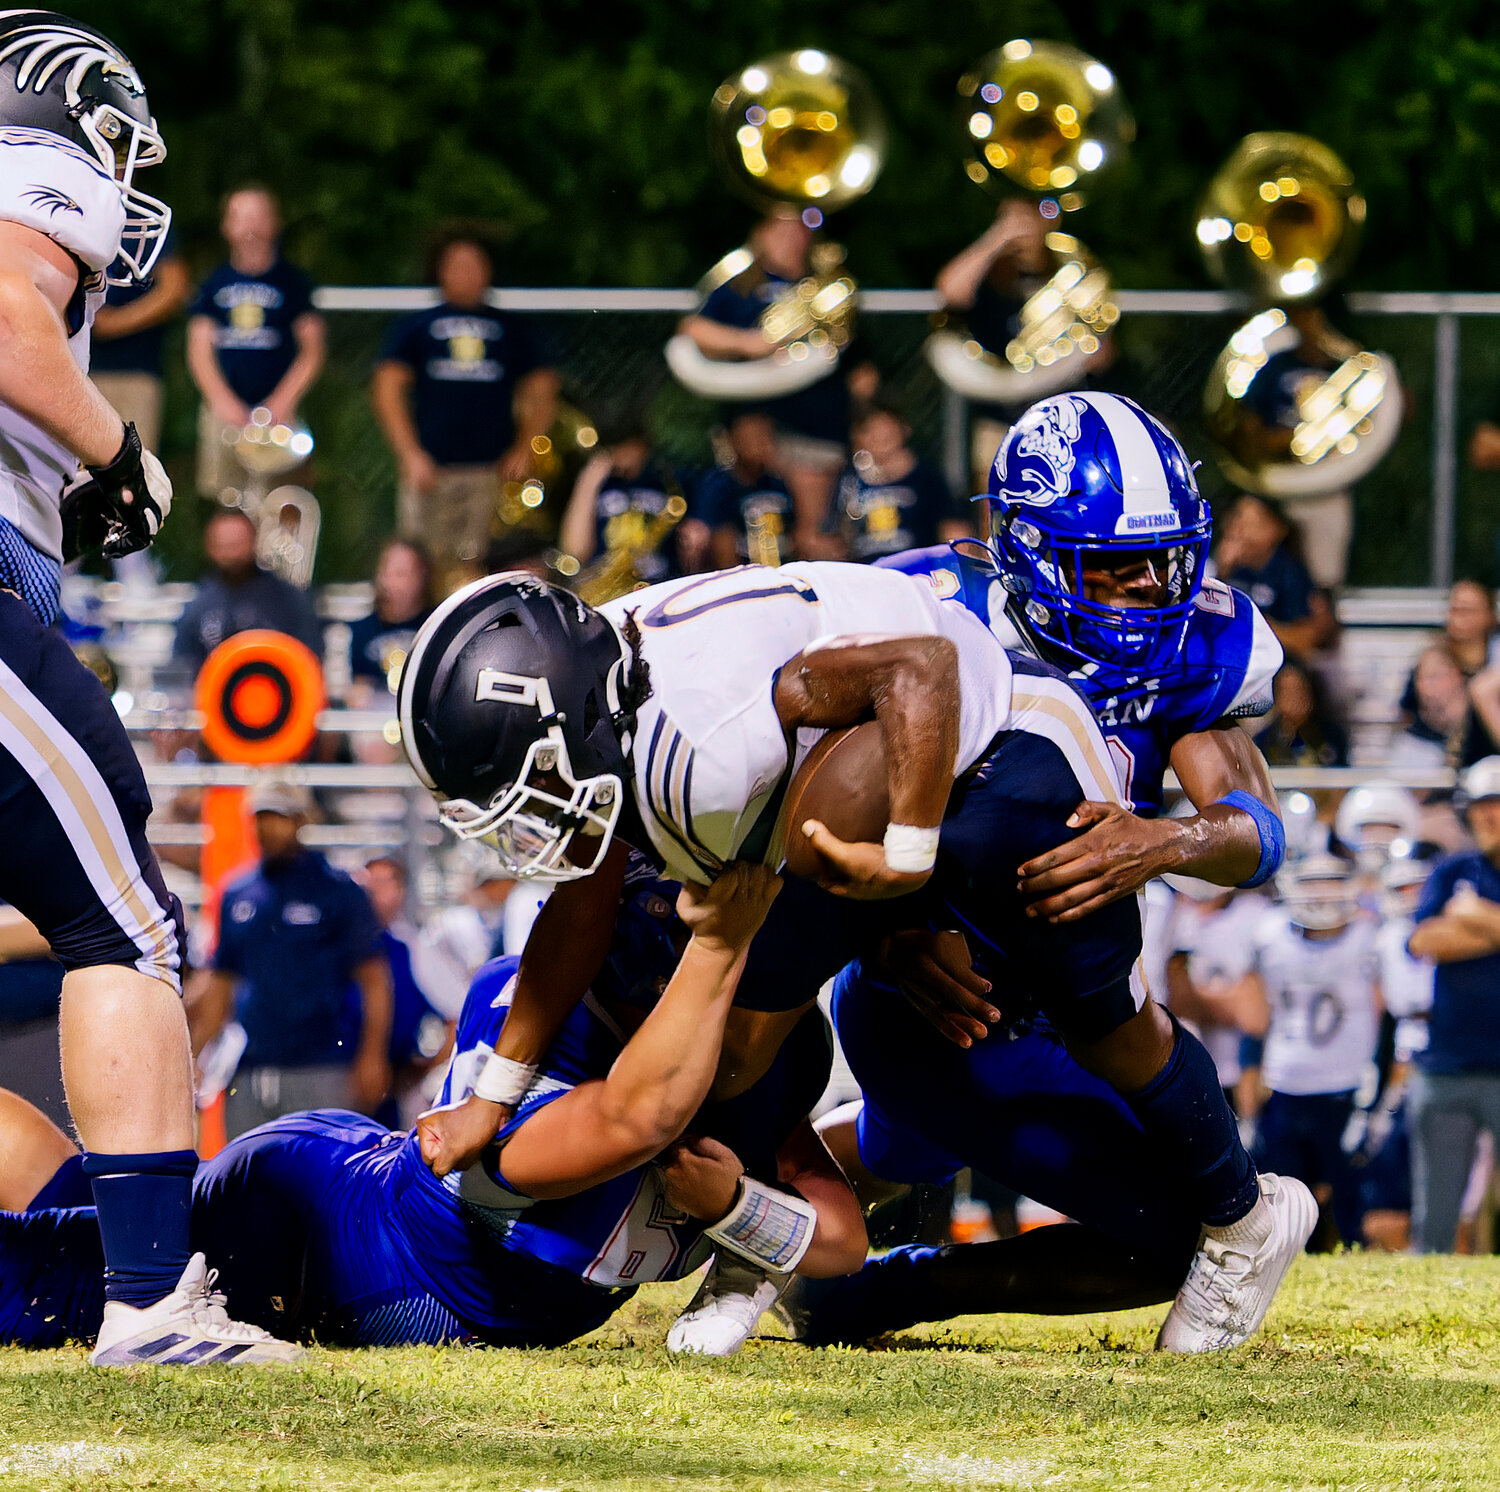 After several plays on the sideline after being somewhat hobbled, Devin Robertson immediately makes an impact on this tackle for loss. [more images from the Bulldogs' home-opener]